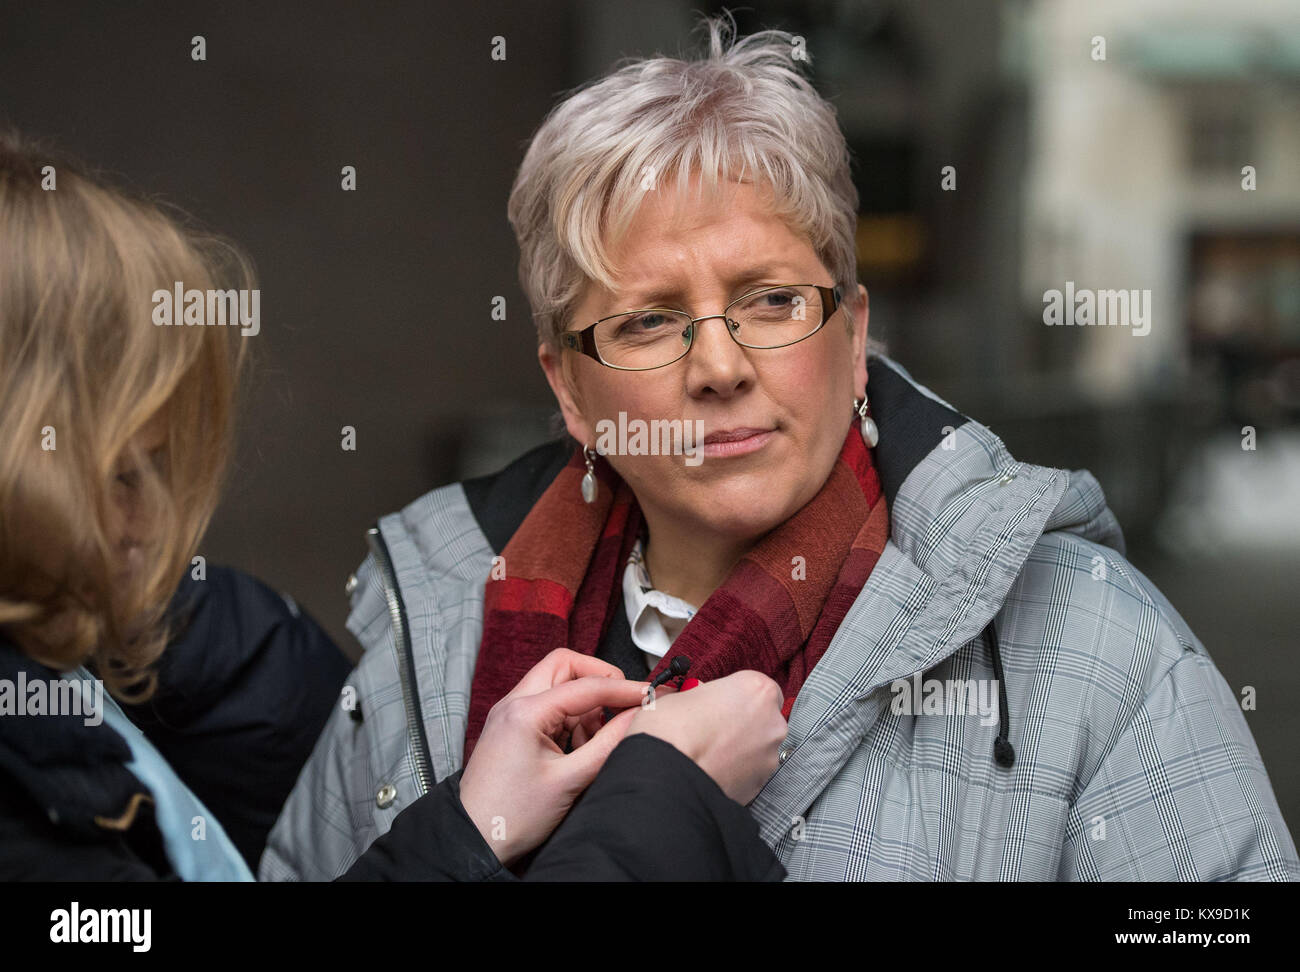 Journalist Carrie Gracie speaks to the media outside BBC Broadcasting House in London after she turned down a &pound;45,000 rise, describing the offer as a 'botched solution' to the problem of unequal pay at the BBC. Stock Photo